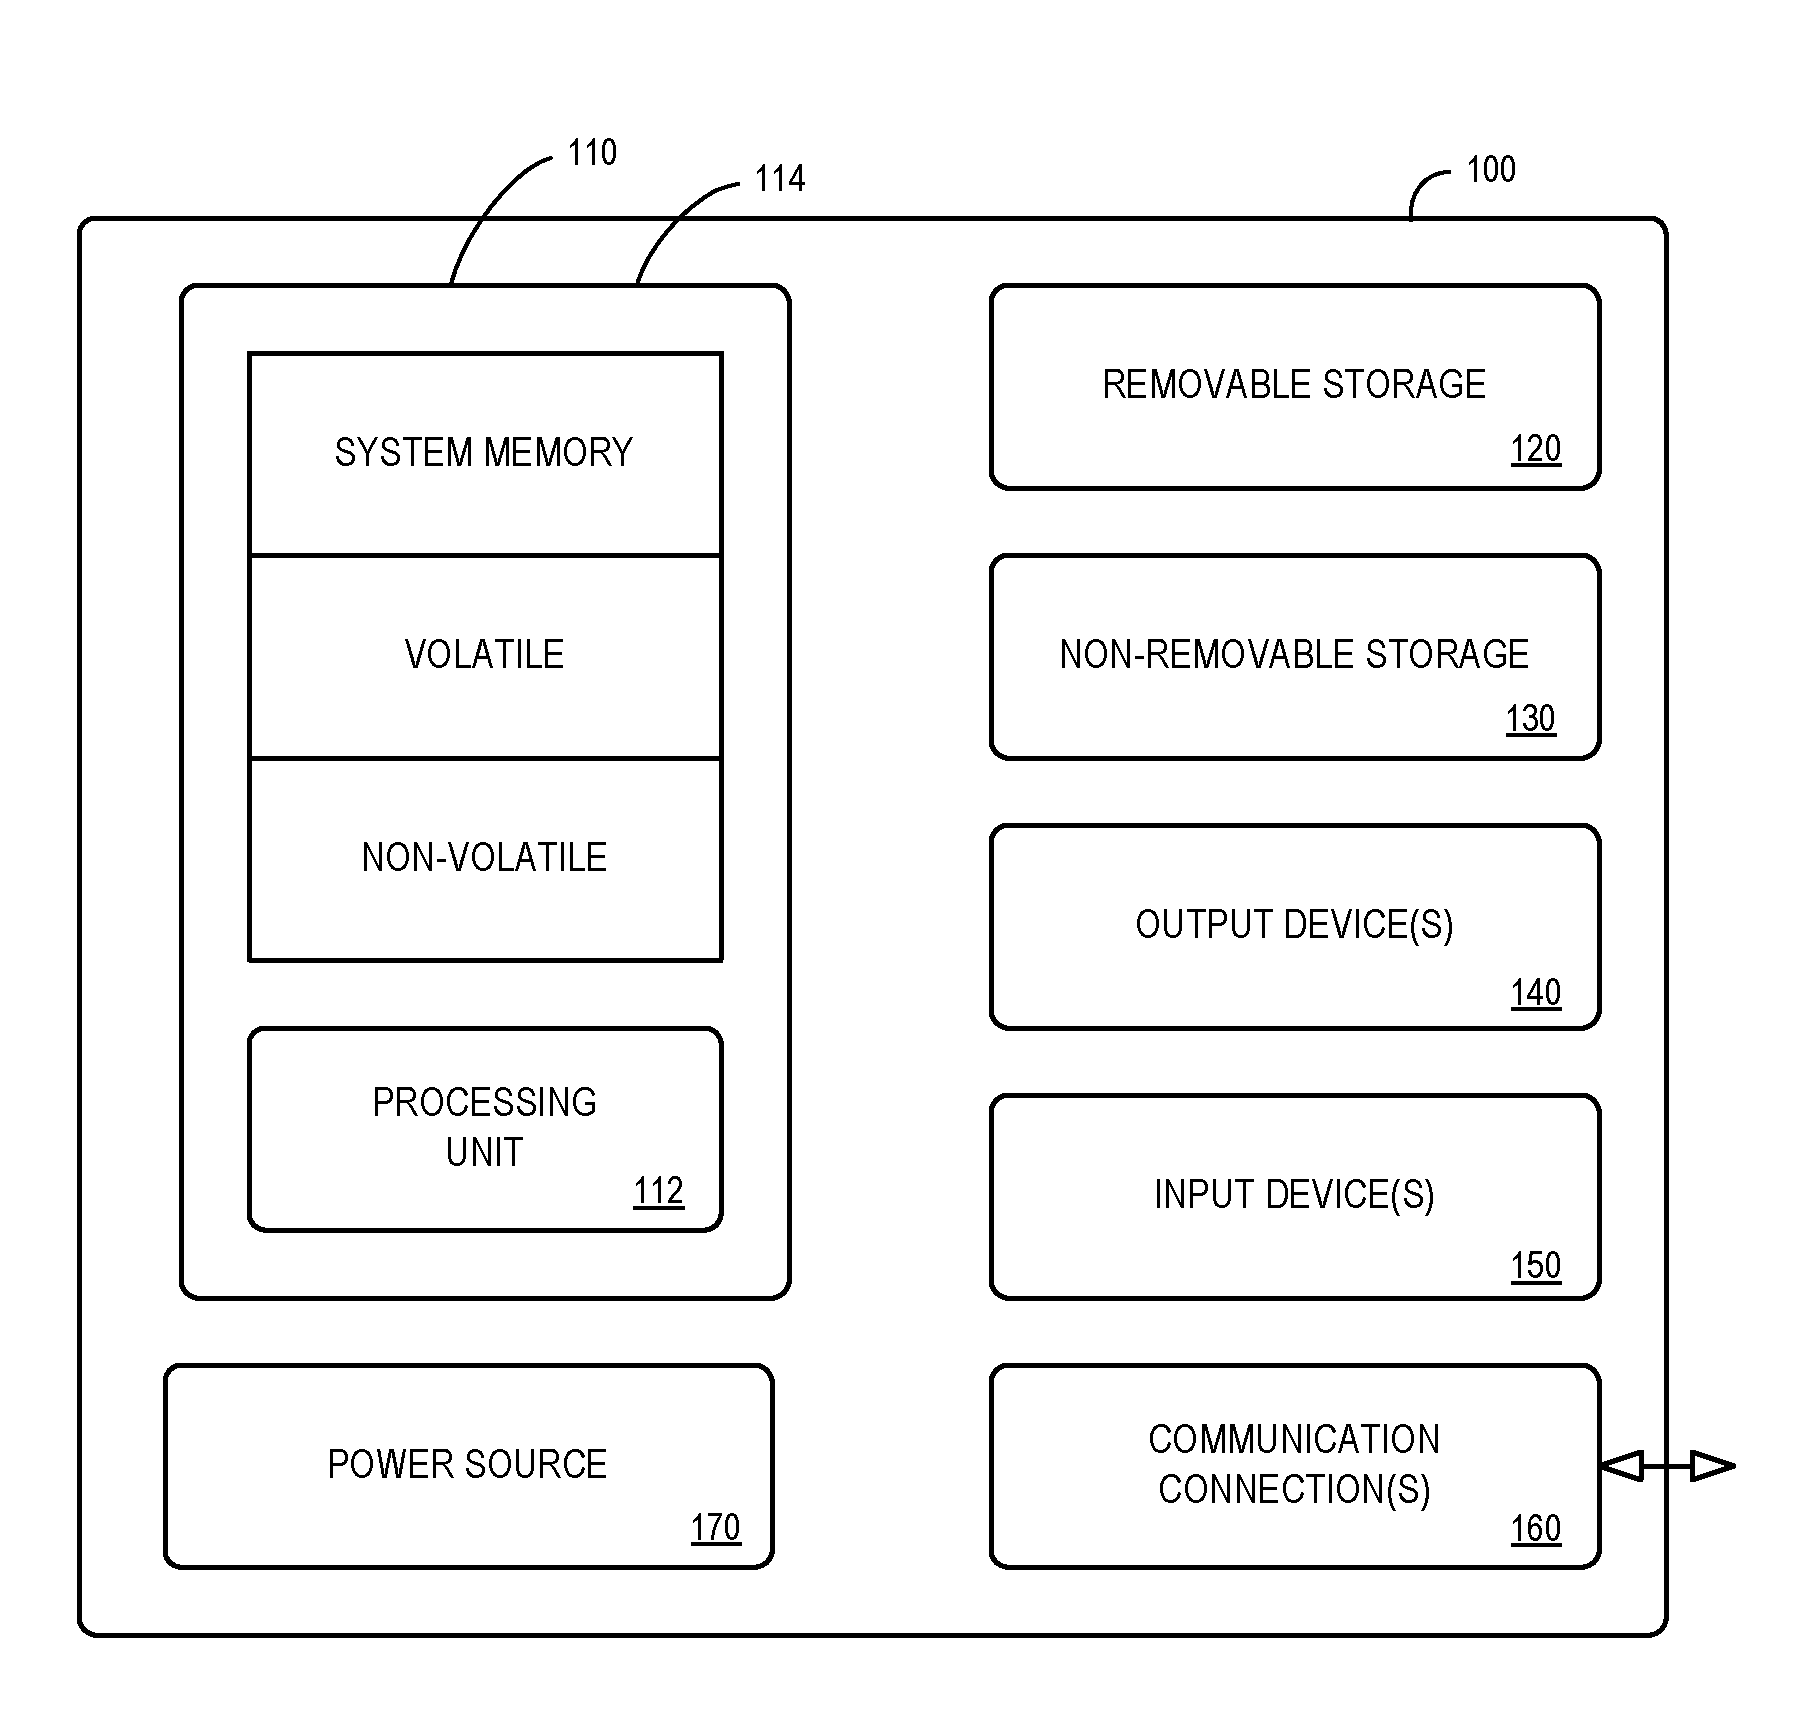 Dynamic adjustment of a wireless network media access control parameter